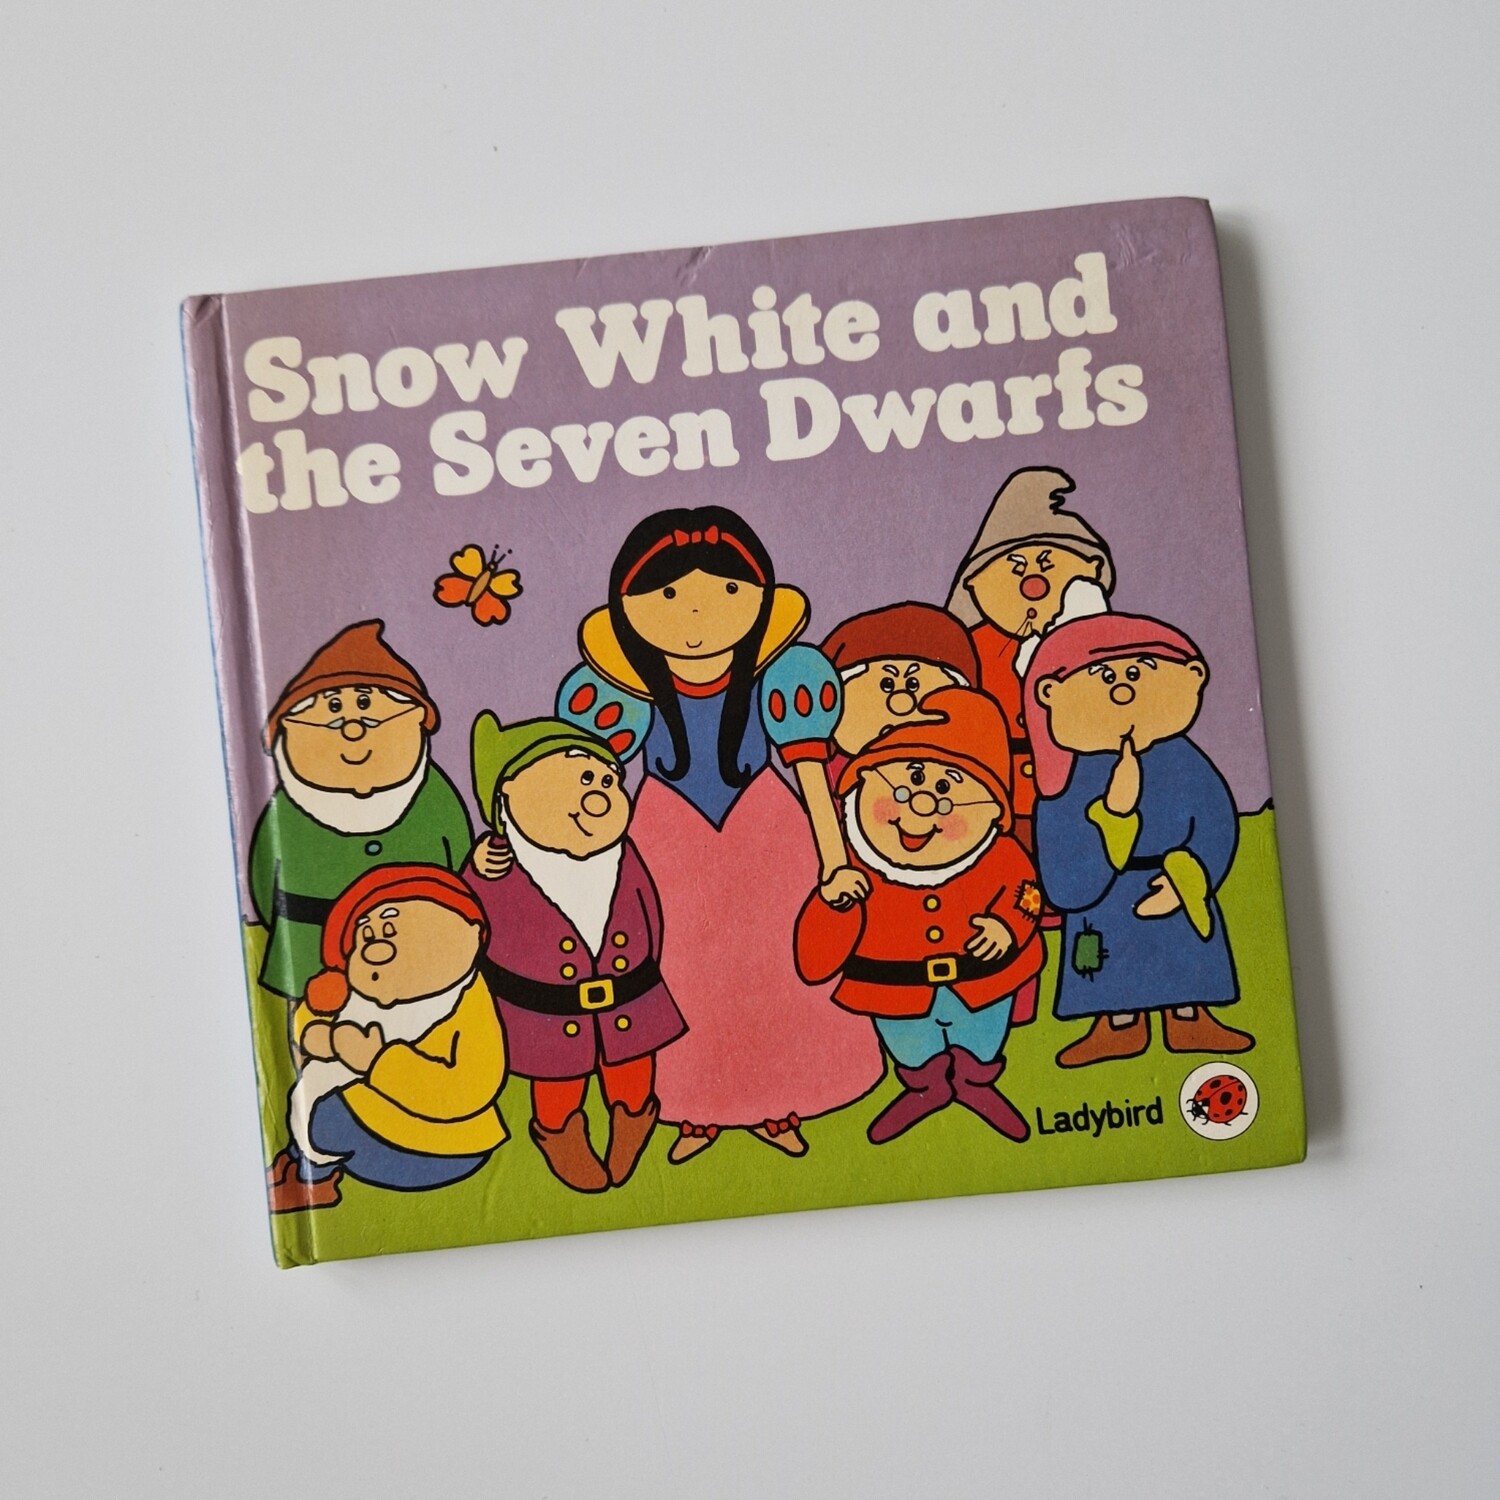 Snow White and the Seven Dwarfs - Ladybird Book